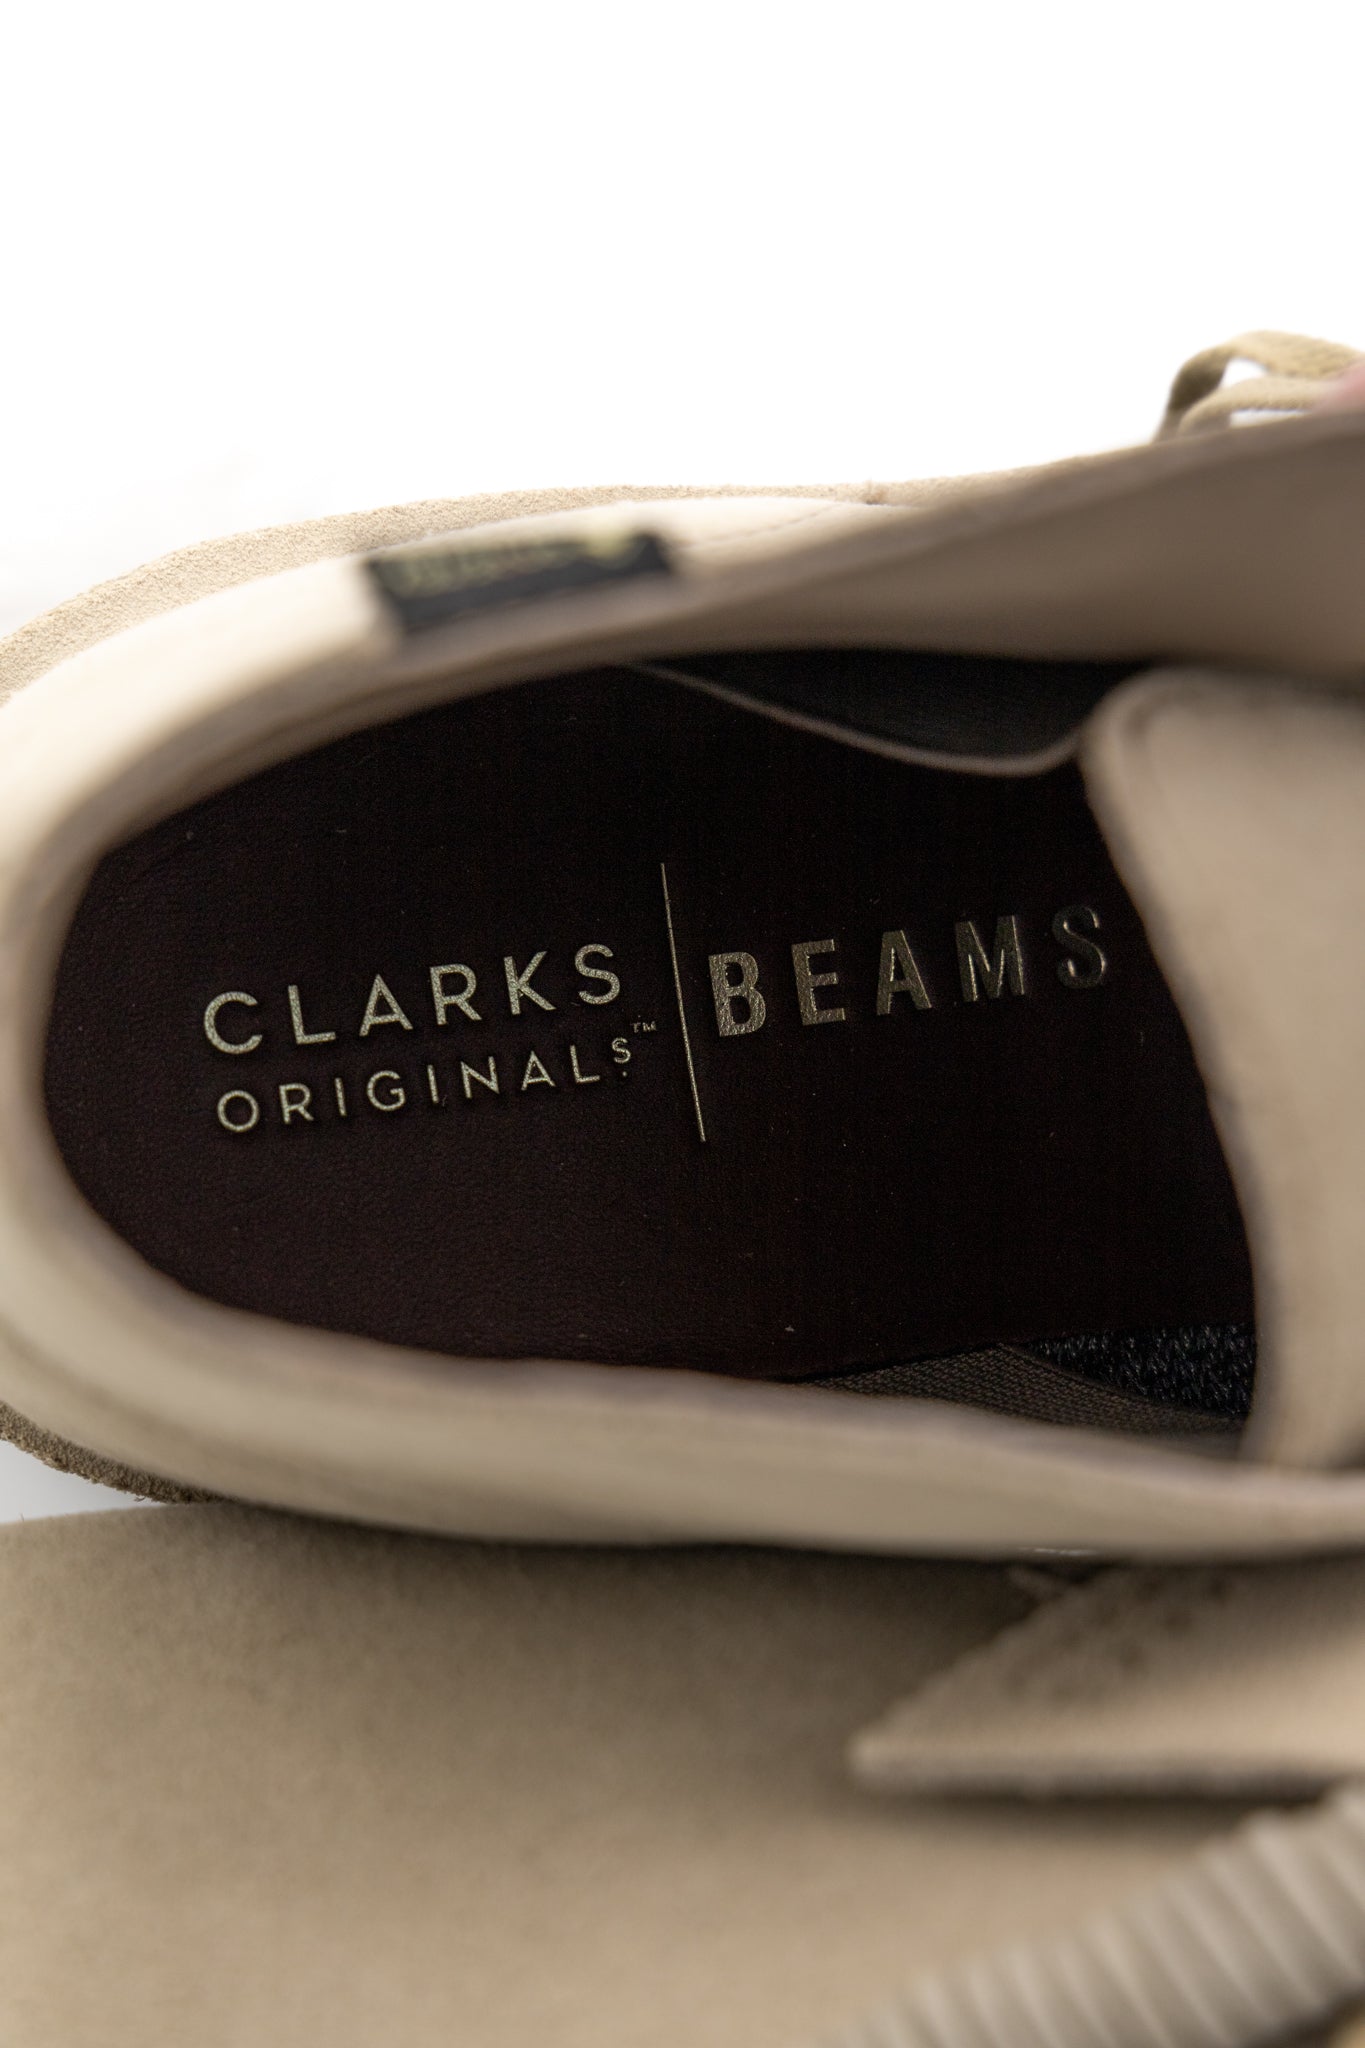 Clarks Originals collaboration with BEAMS. Color: Sand. Suede upper "GORE-TEX (R)" with excellent waterproof and moisture permeability for the upper. Rubber sole. Elastic gore inside the shoes that allows them to be worn as a slip on without a shoelace